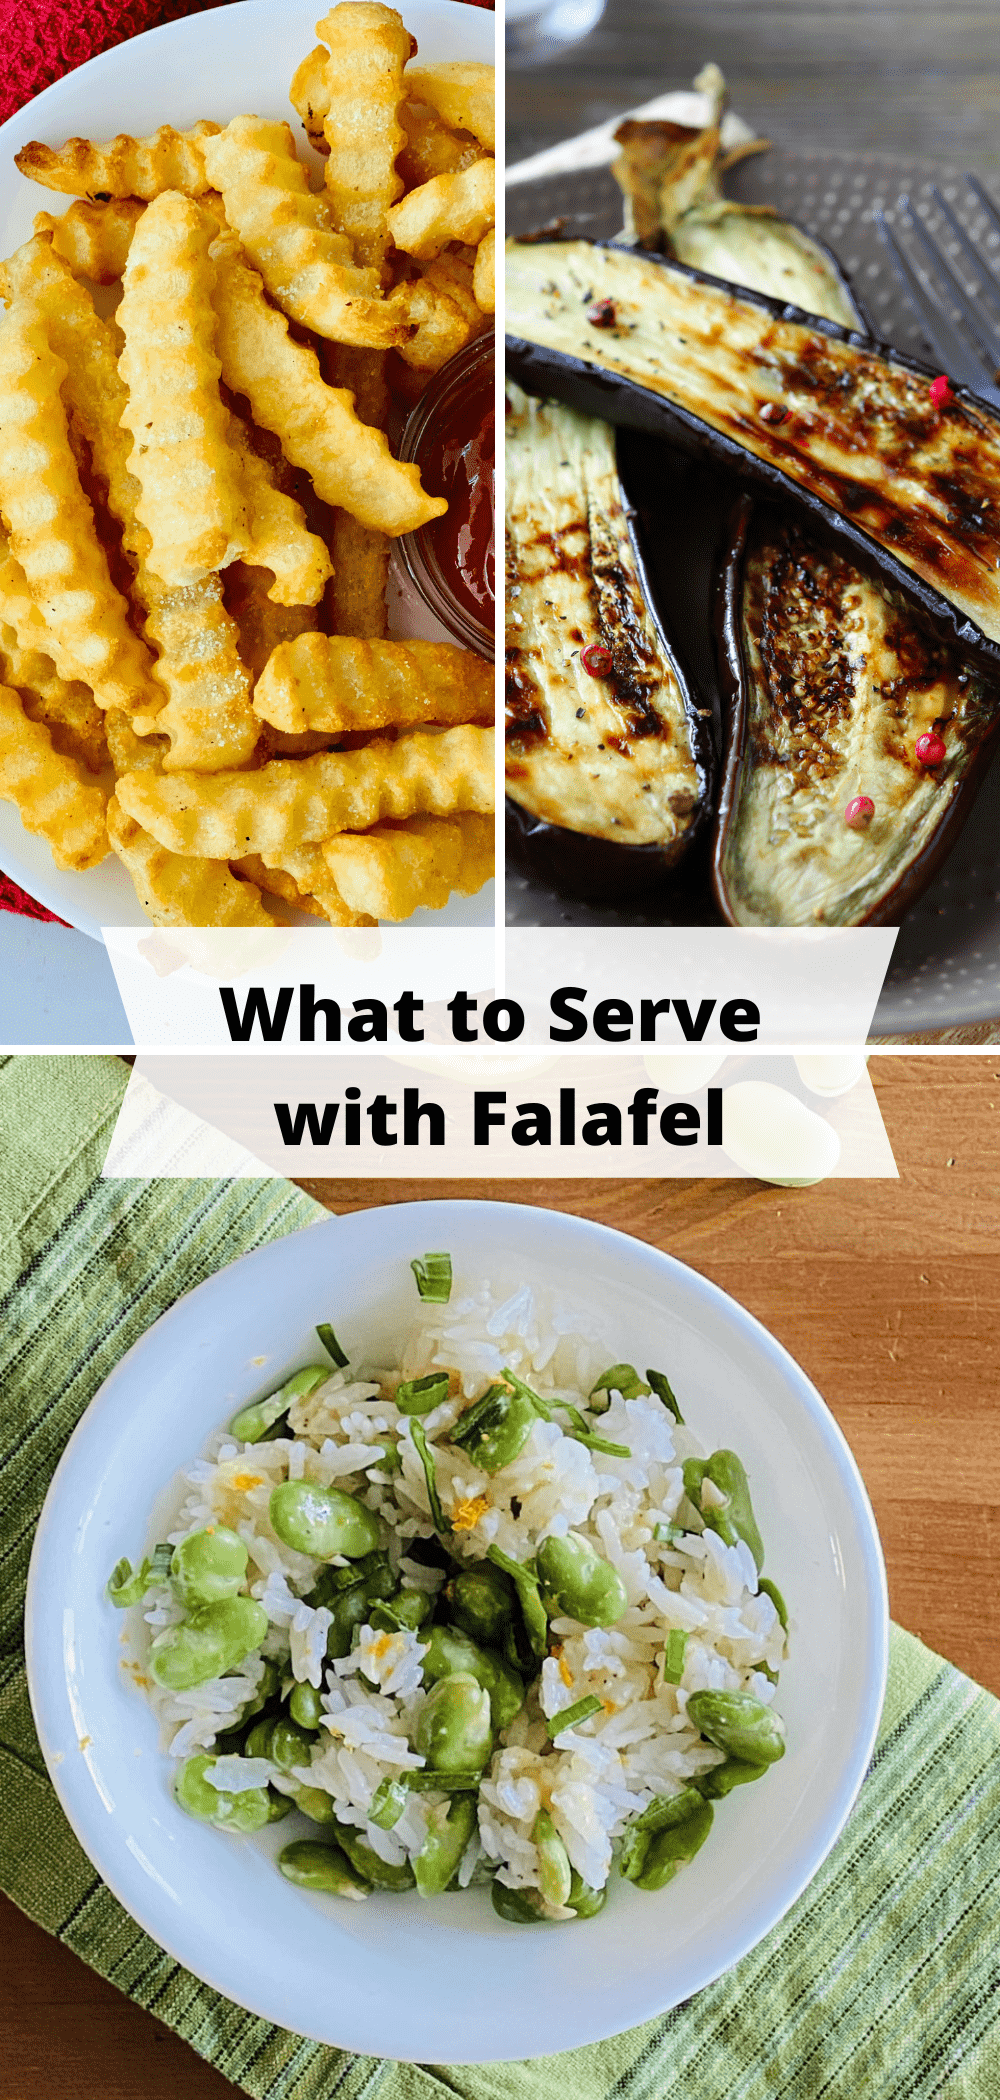 3 recipes great to serve with falafel including fries, eggplant, and fava rice salad.